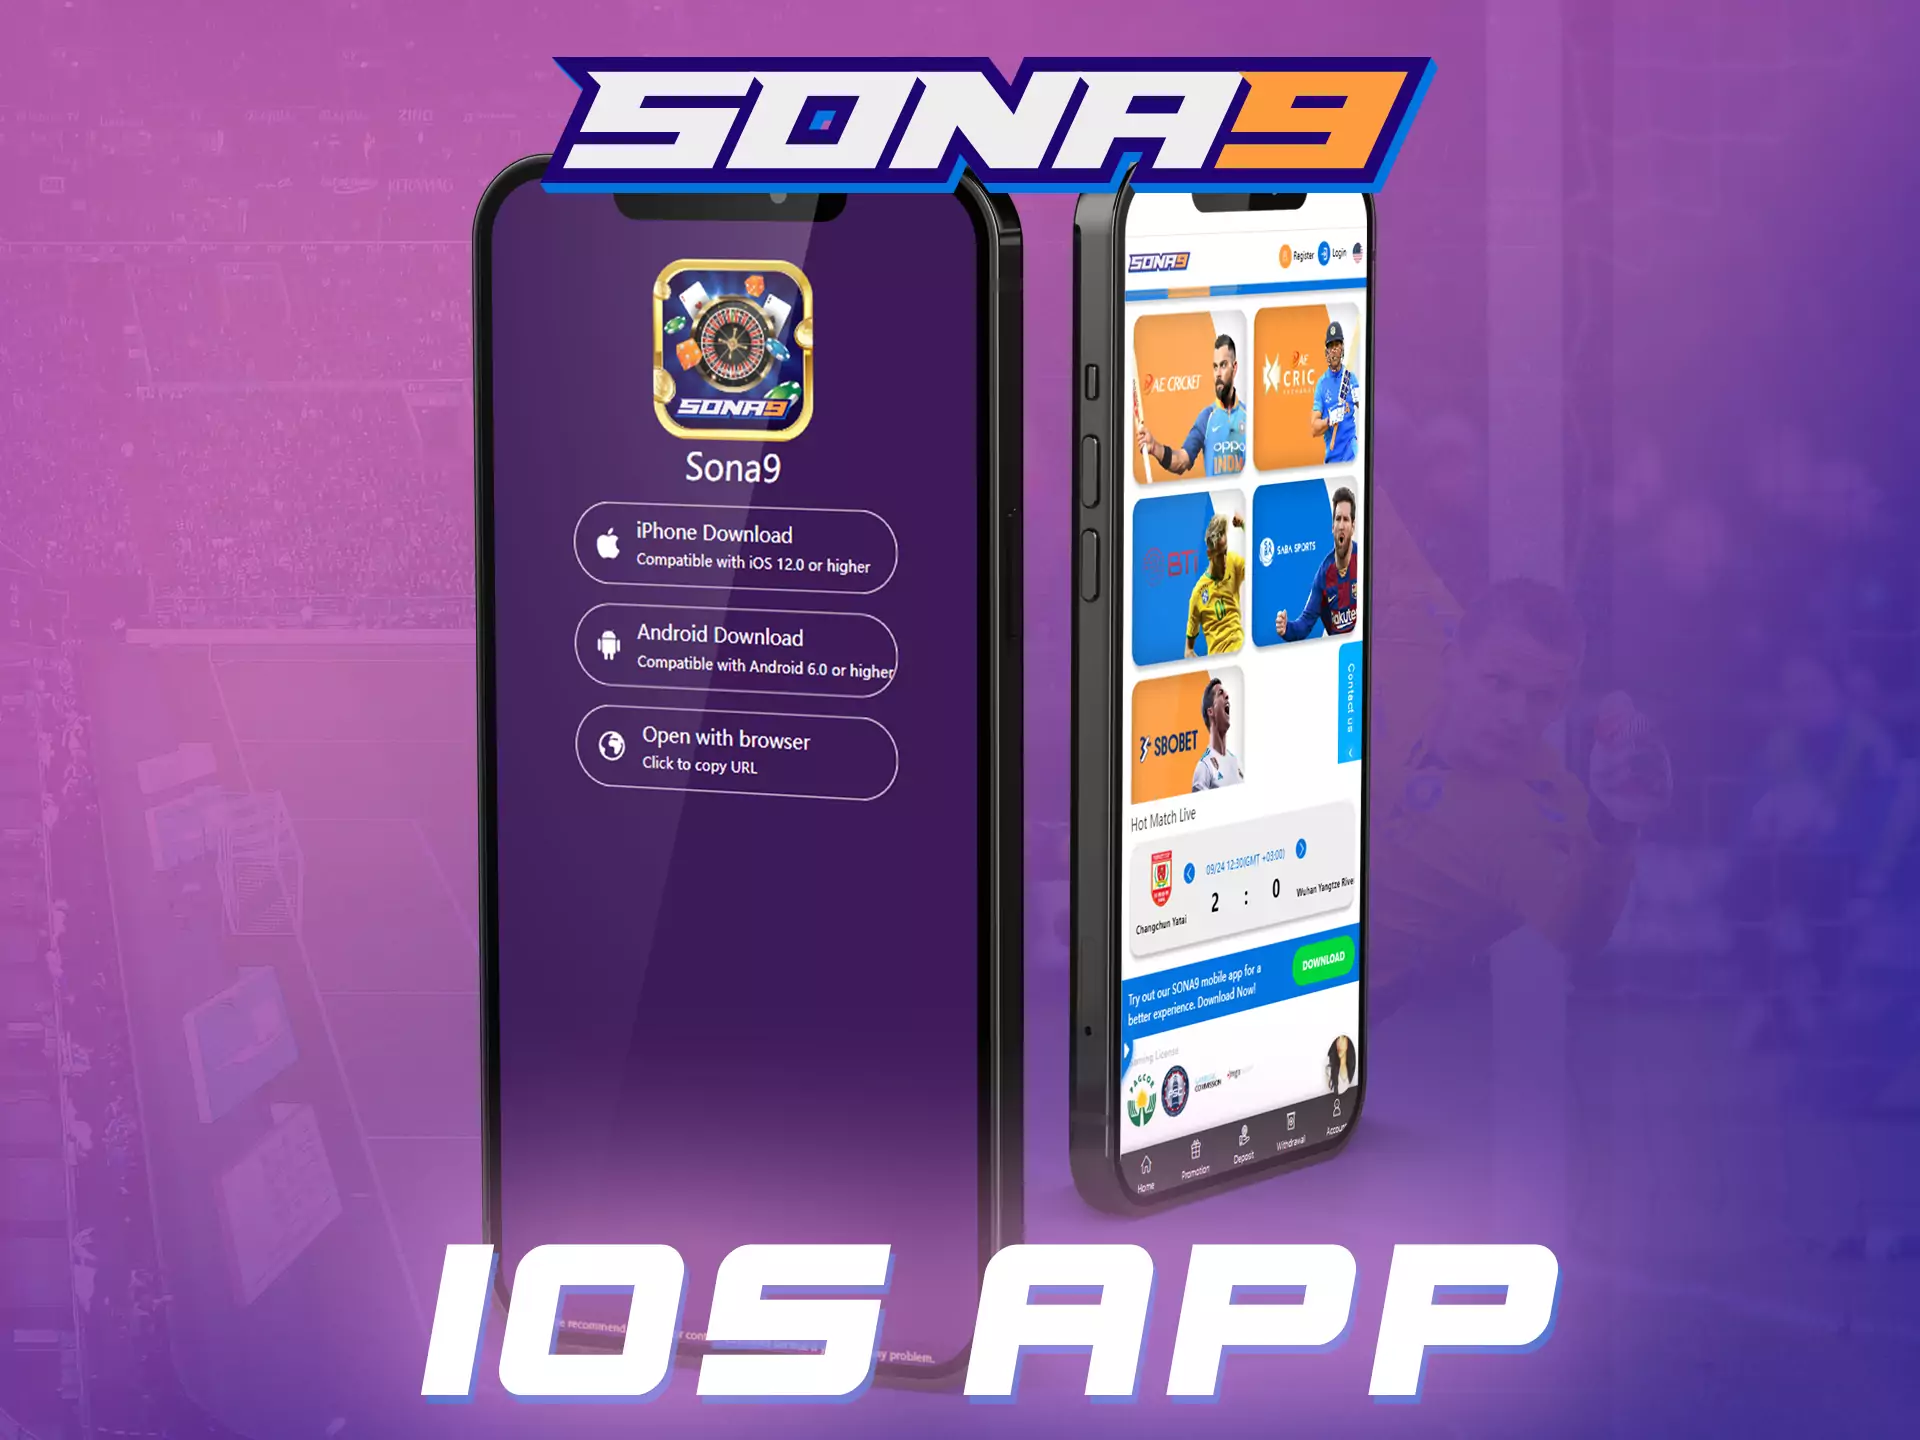 From iOS devices, you can also bet using the Sona9 app.